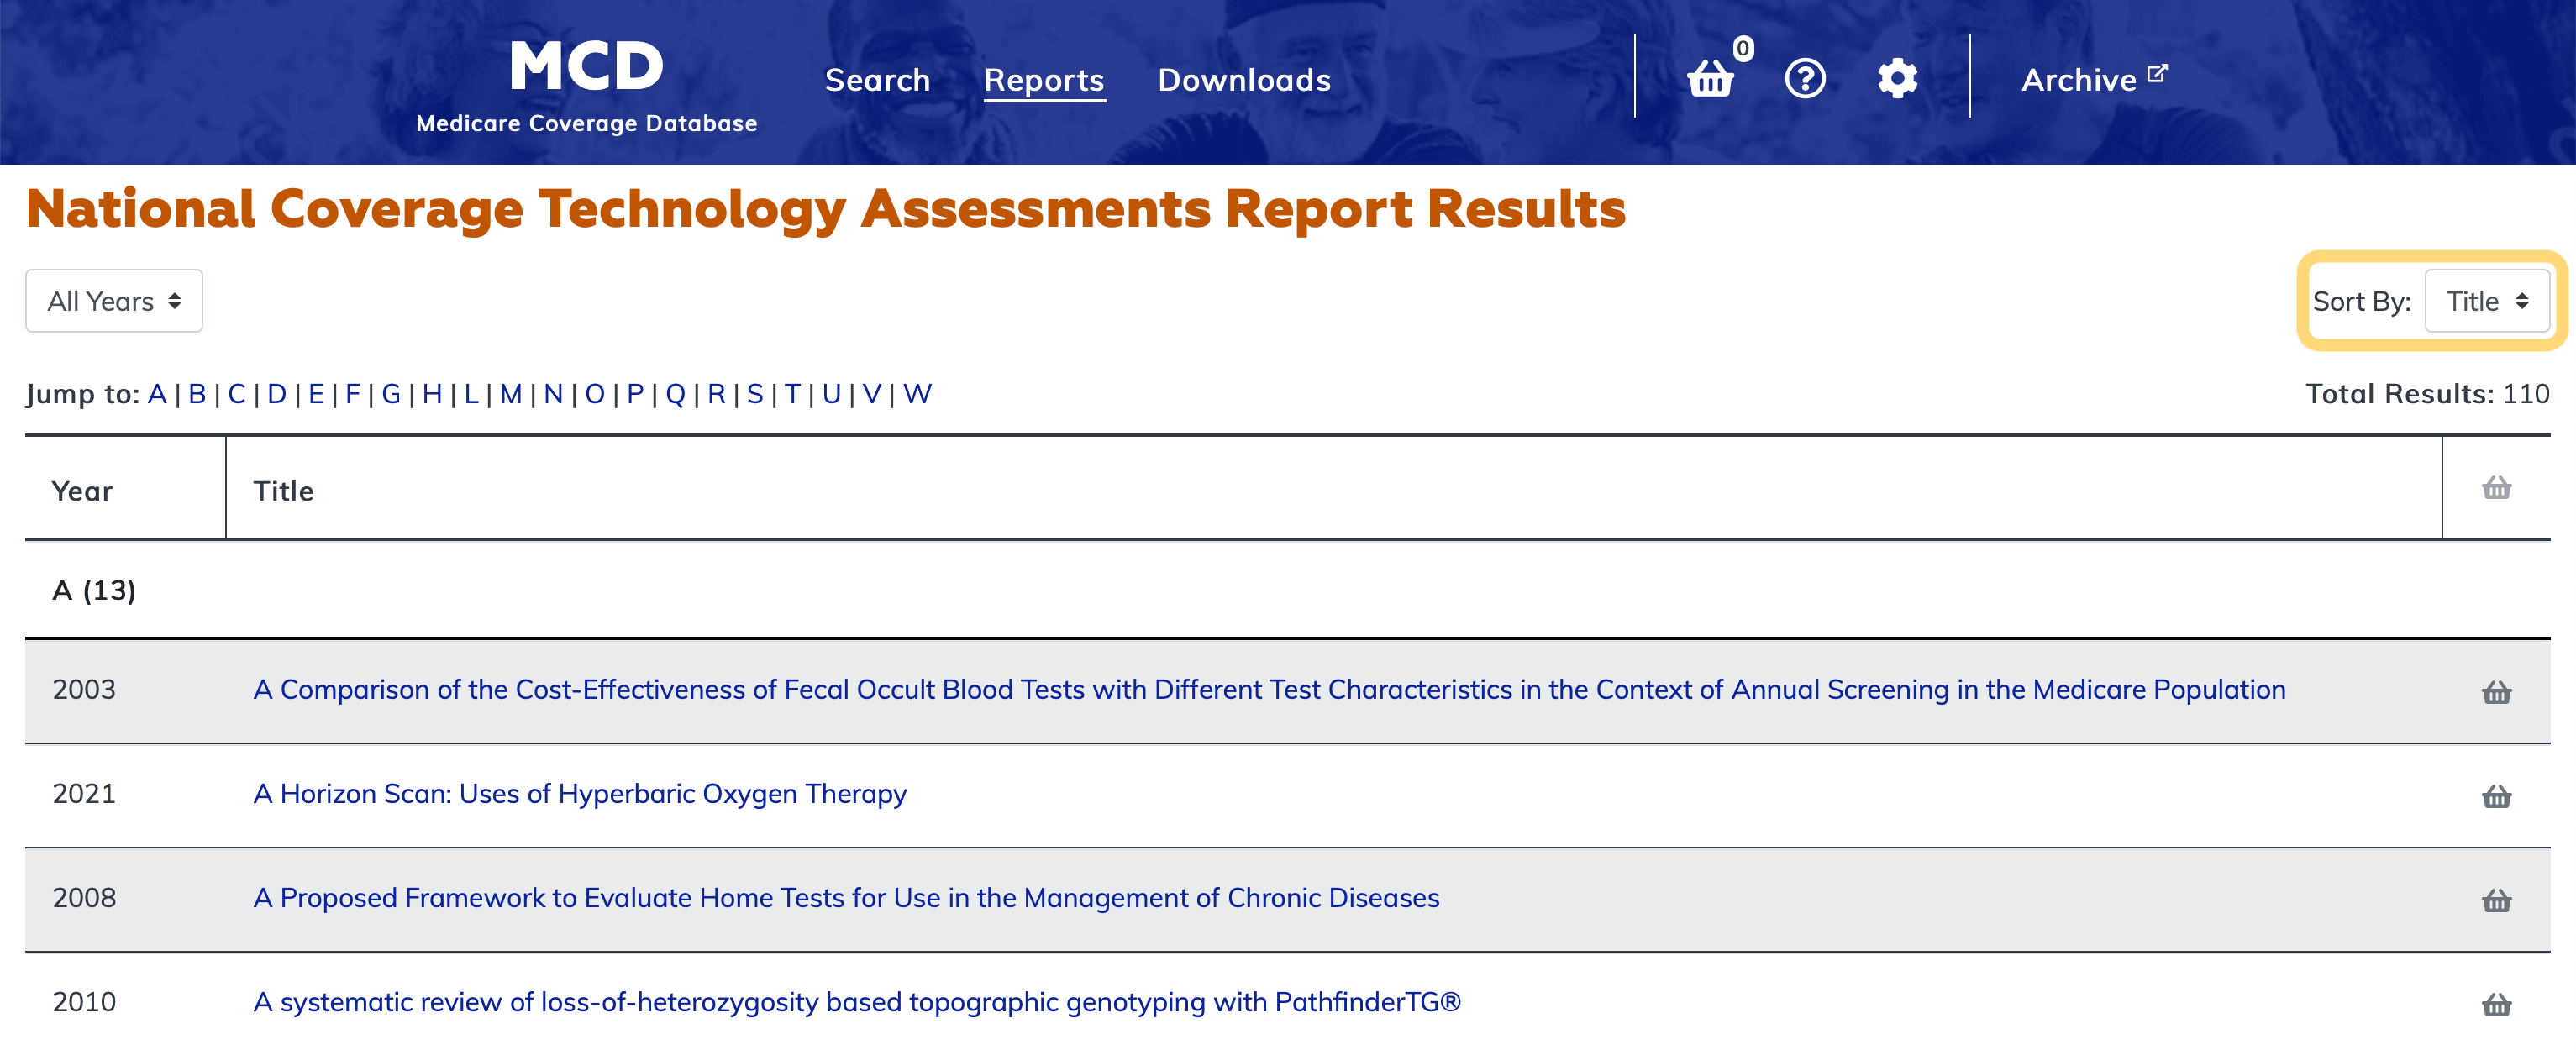 National Coverage Technology Assessments Report sort options highlighted